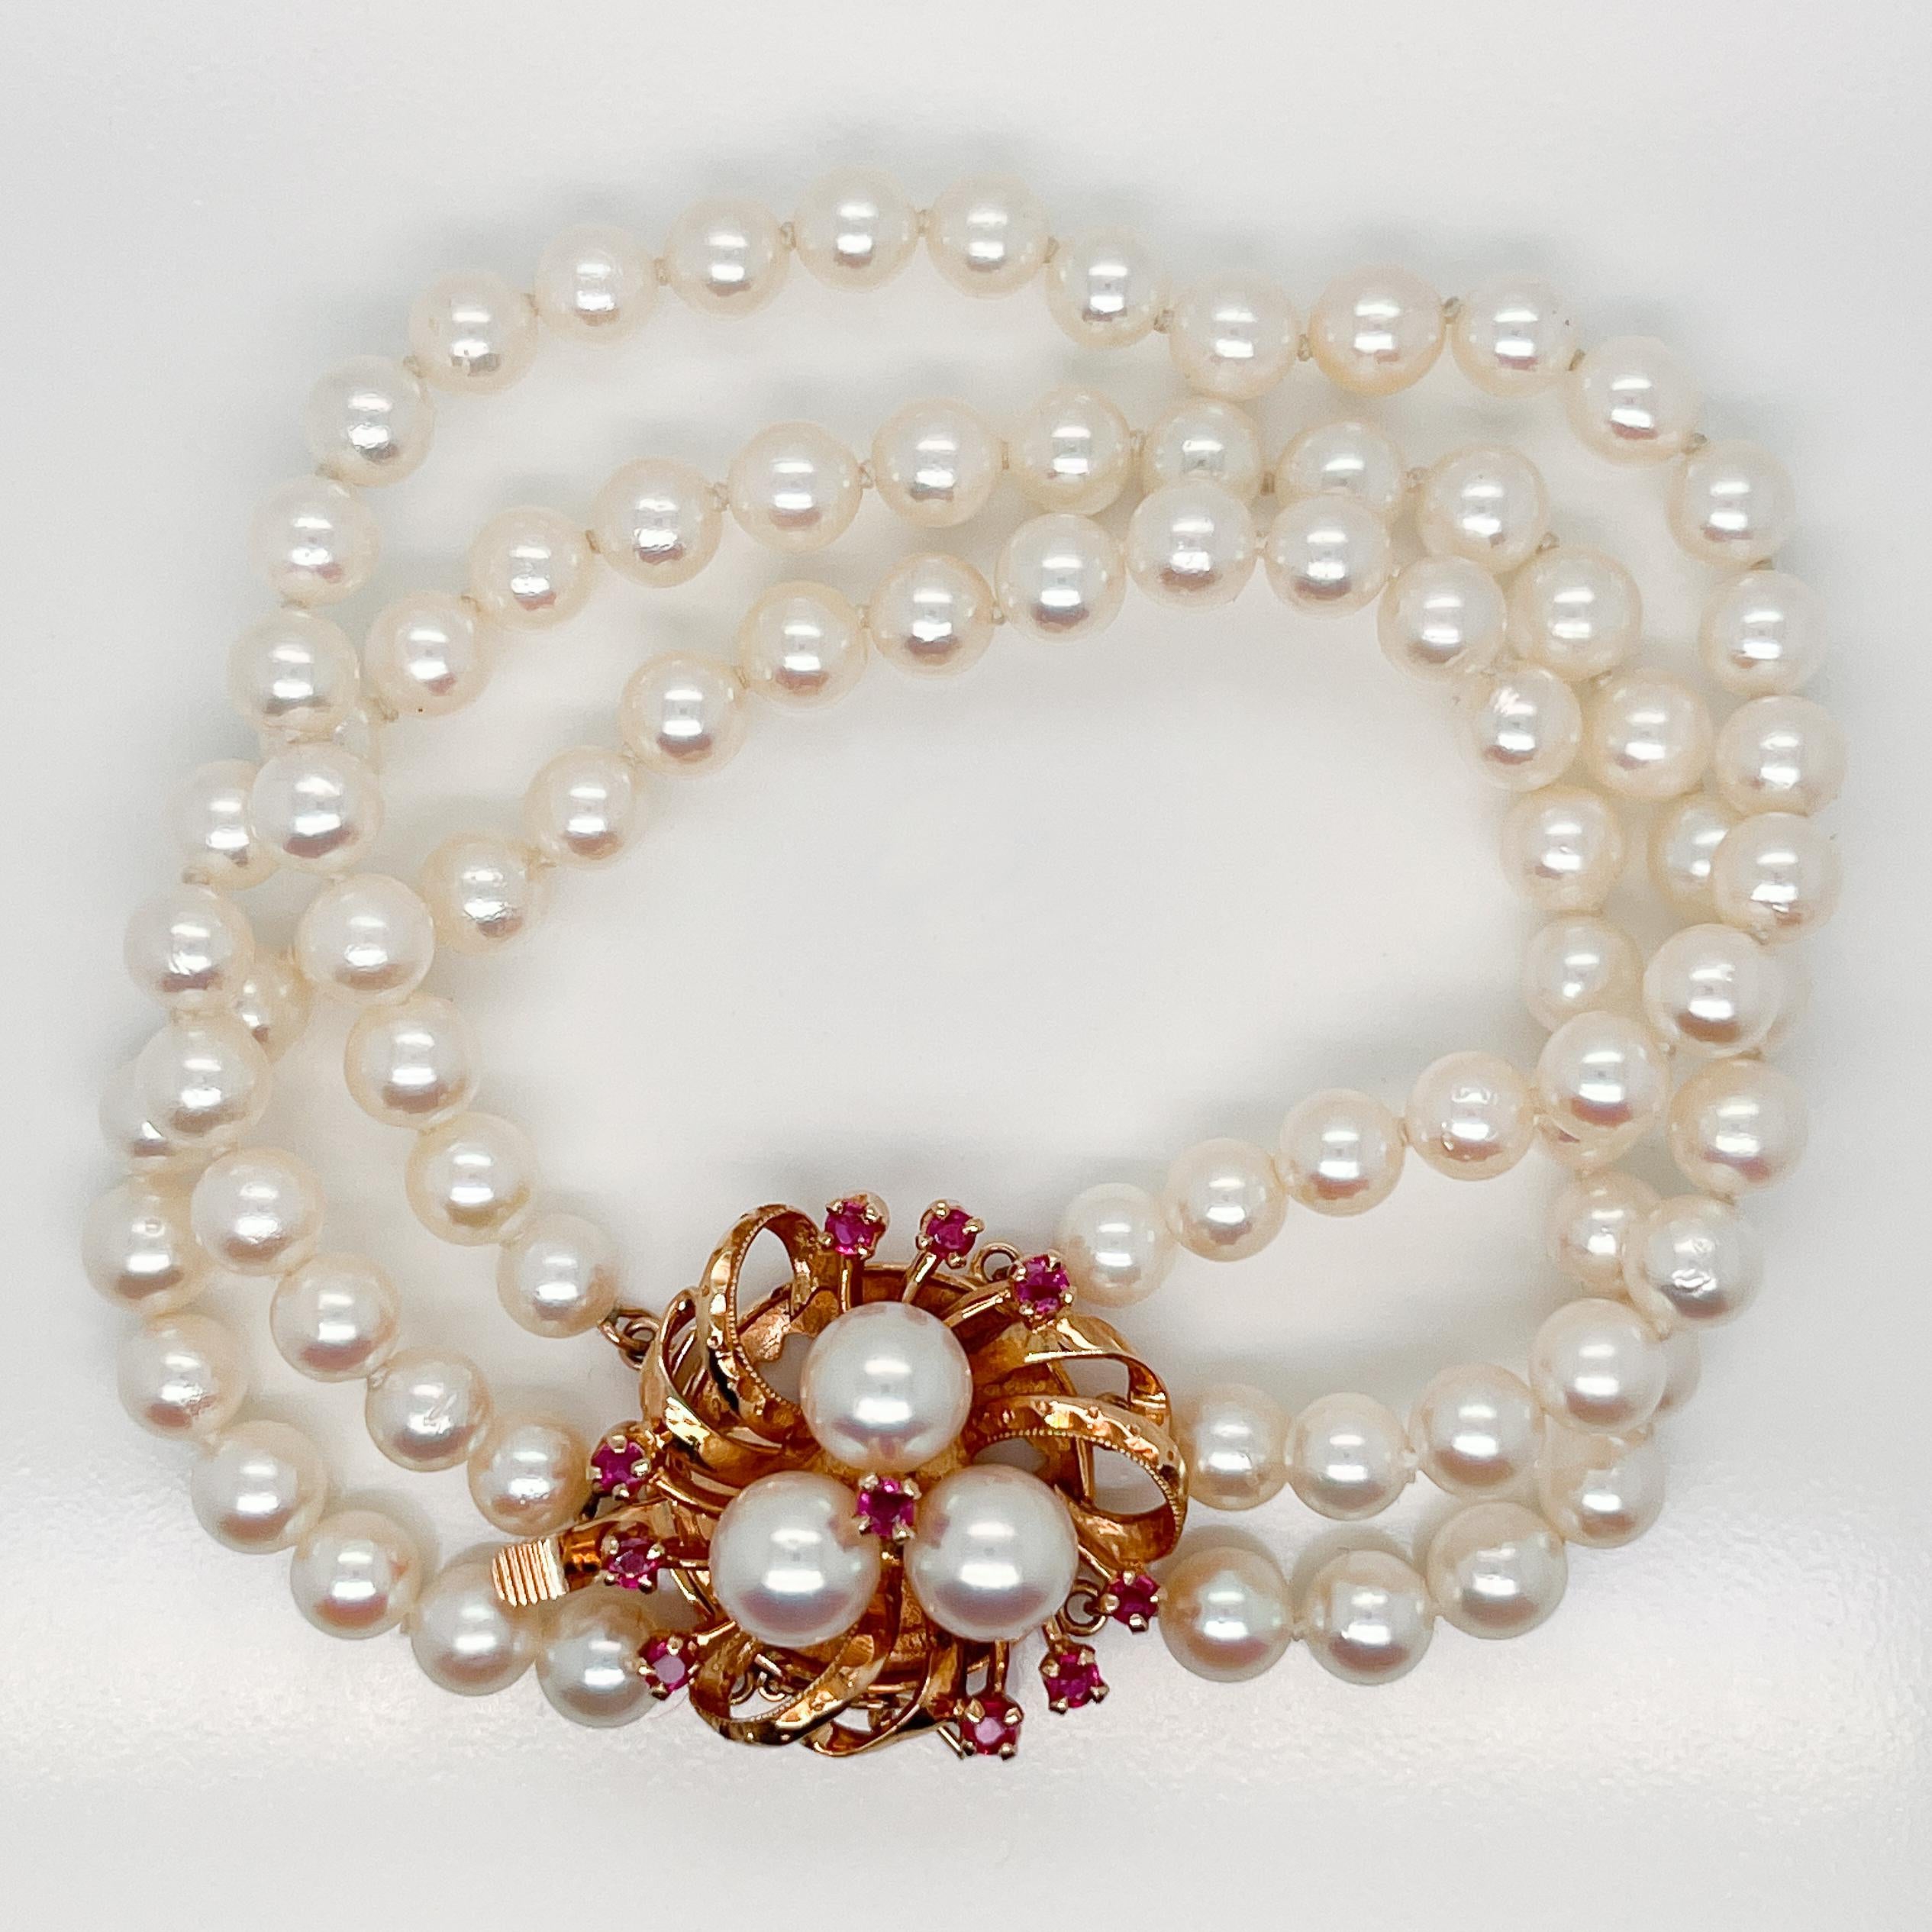 A very fine 3-strand Tasaki Akoya pearl bracelet with a 14k gold and ruby clasp.

With three strands of round white pearls hand knotted on silk cords. 

The flower shaped 14k gold box clasp is prong-set rubies.

Simply a wonderful bracelet!

Overall